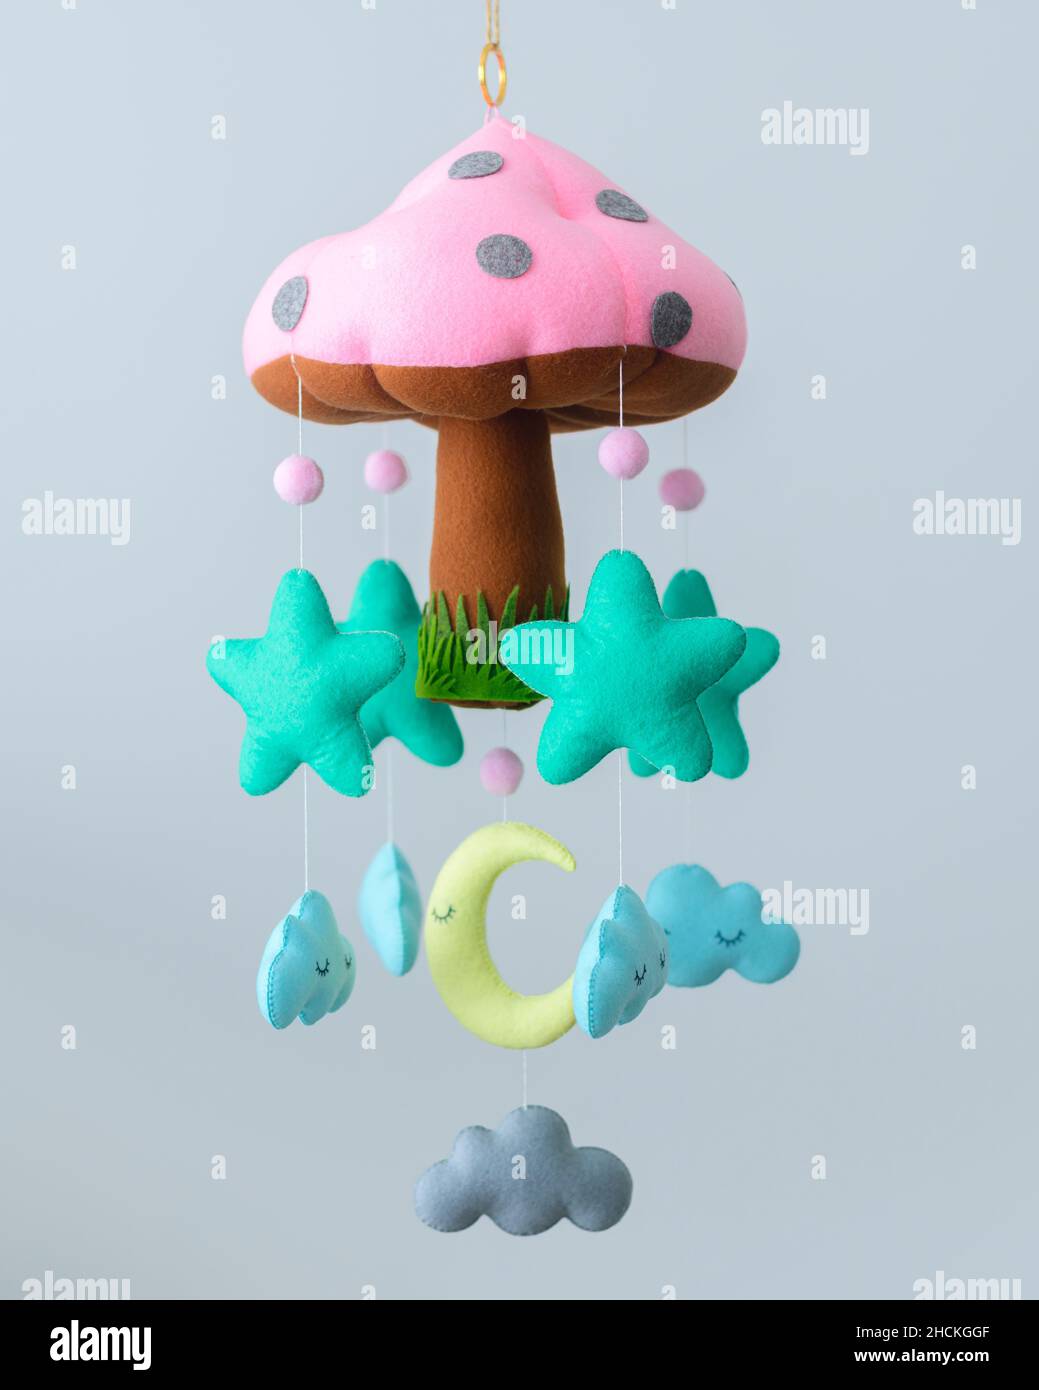 Beautiful Baby Cot mobile, Plushie mushroom with stars, clouds, and the moon hanging from strings. Nursery decor to calm and dream sleep for babies. Stock Photo